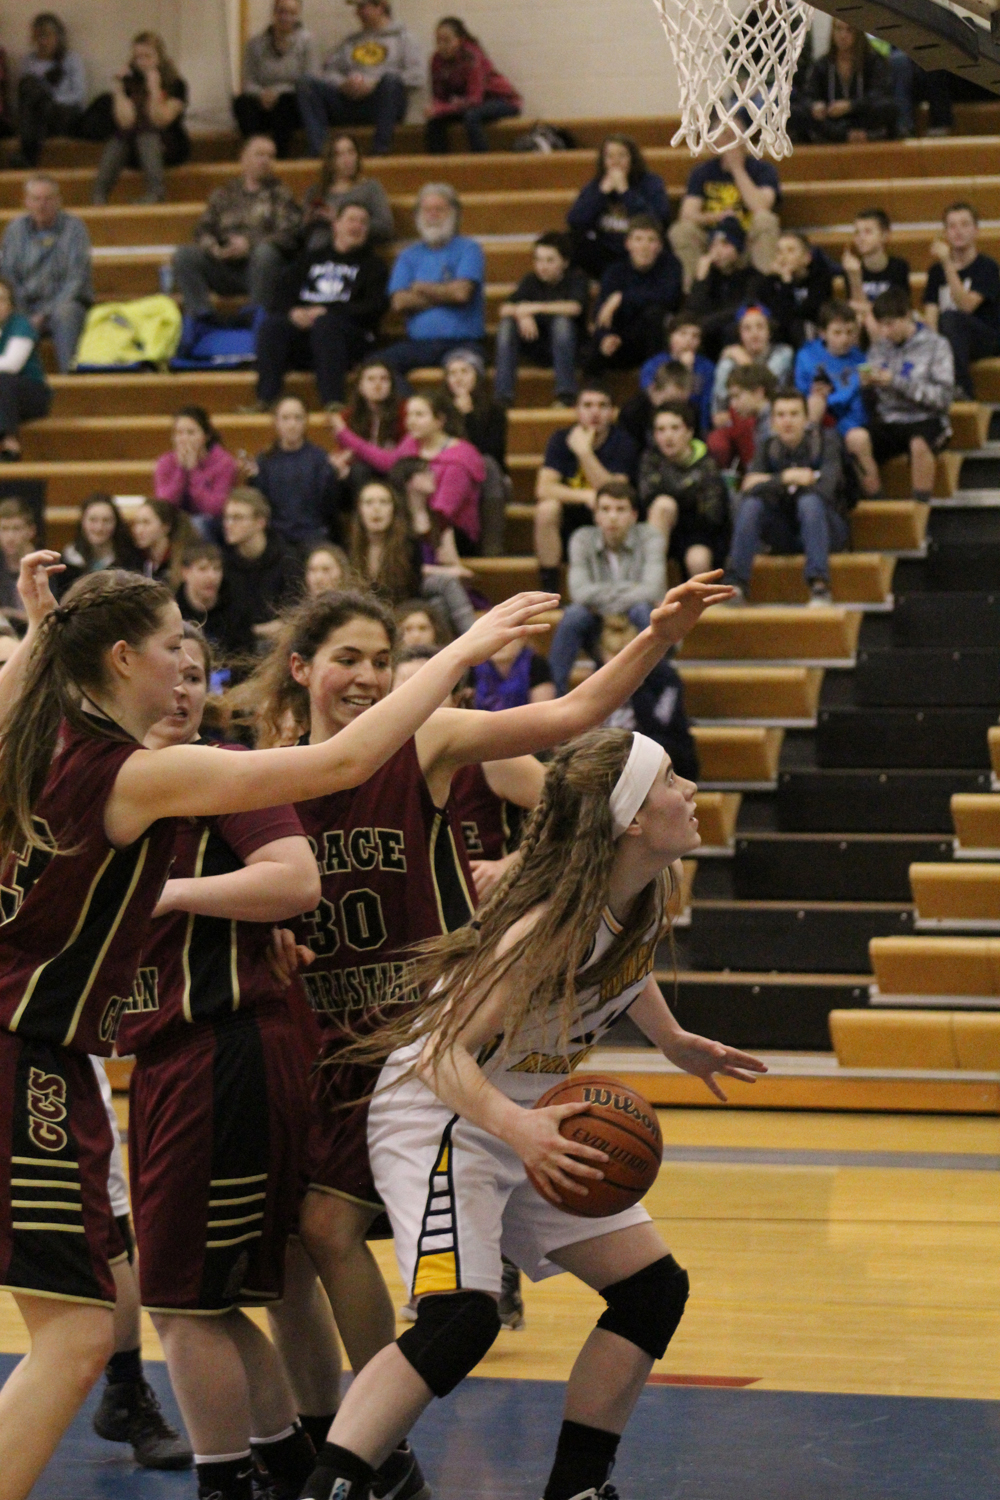 Senior Mariner Madison Akers crouches to block the crowd of grabbing Grace players as she sweeps up the ball to score in the middle of the fourth period. Homer girls varsity won their game against Grace with a final score of 46-35.-Photo by Anna Frost, Homer News